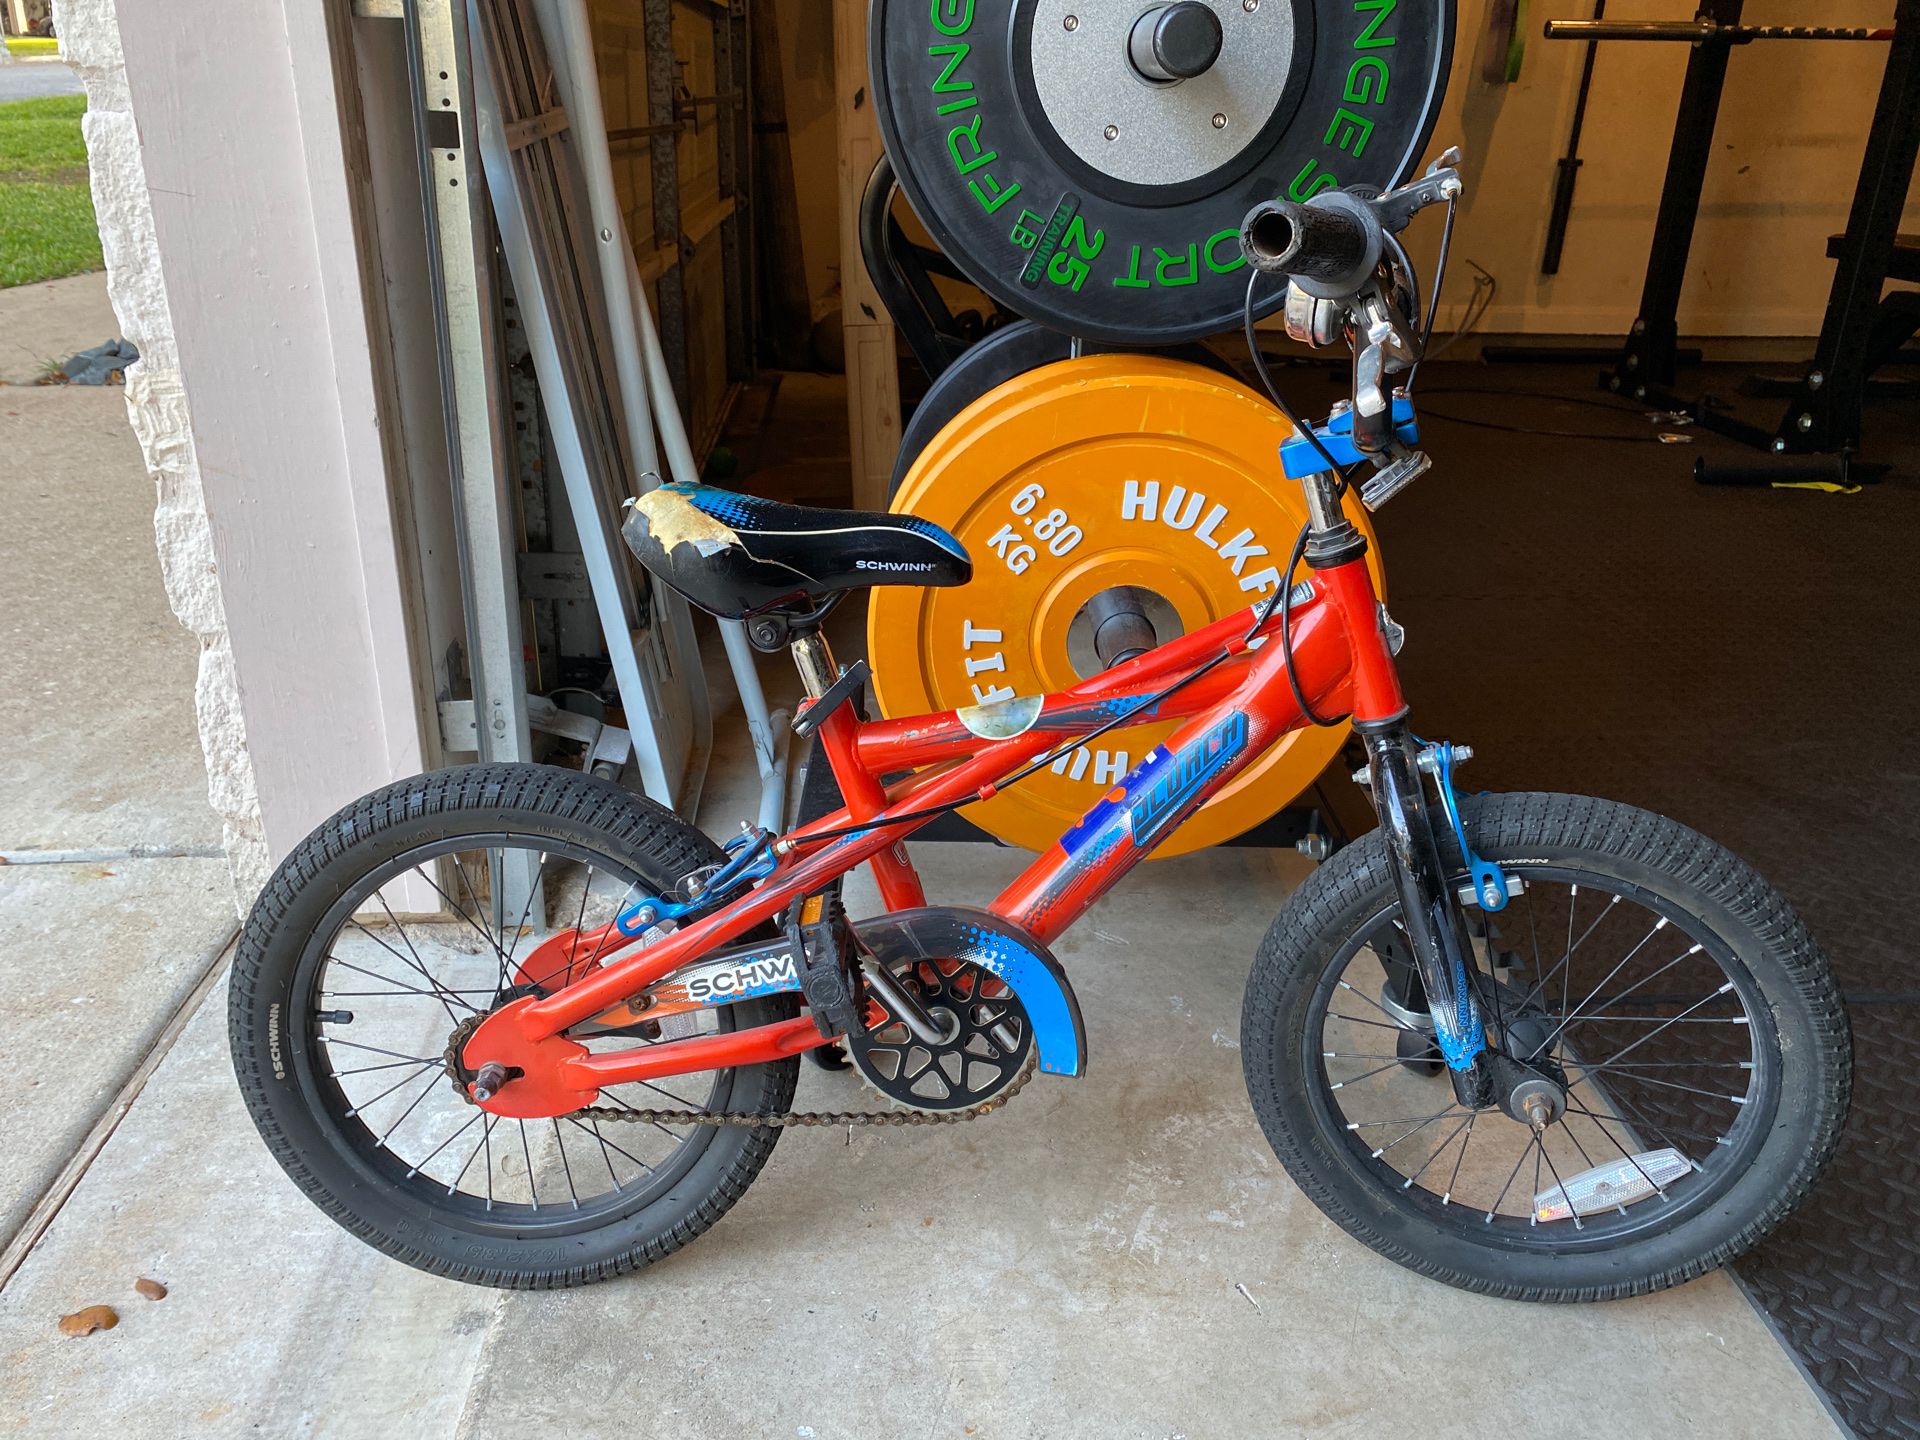 Scwinn Scorch 16” tire boys bike. Good condition. Have pegs and training wheels if necessary.